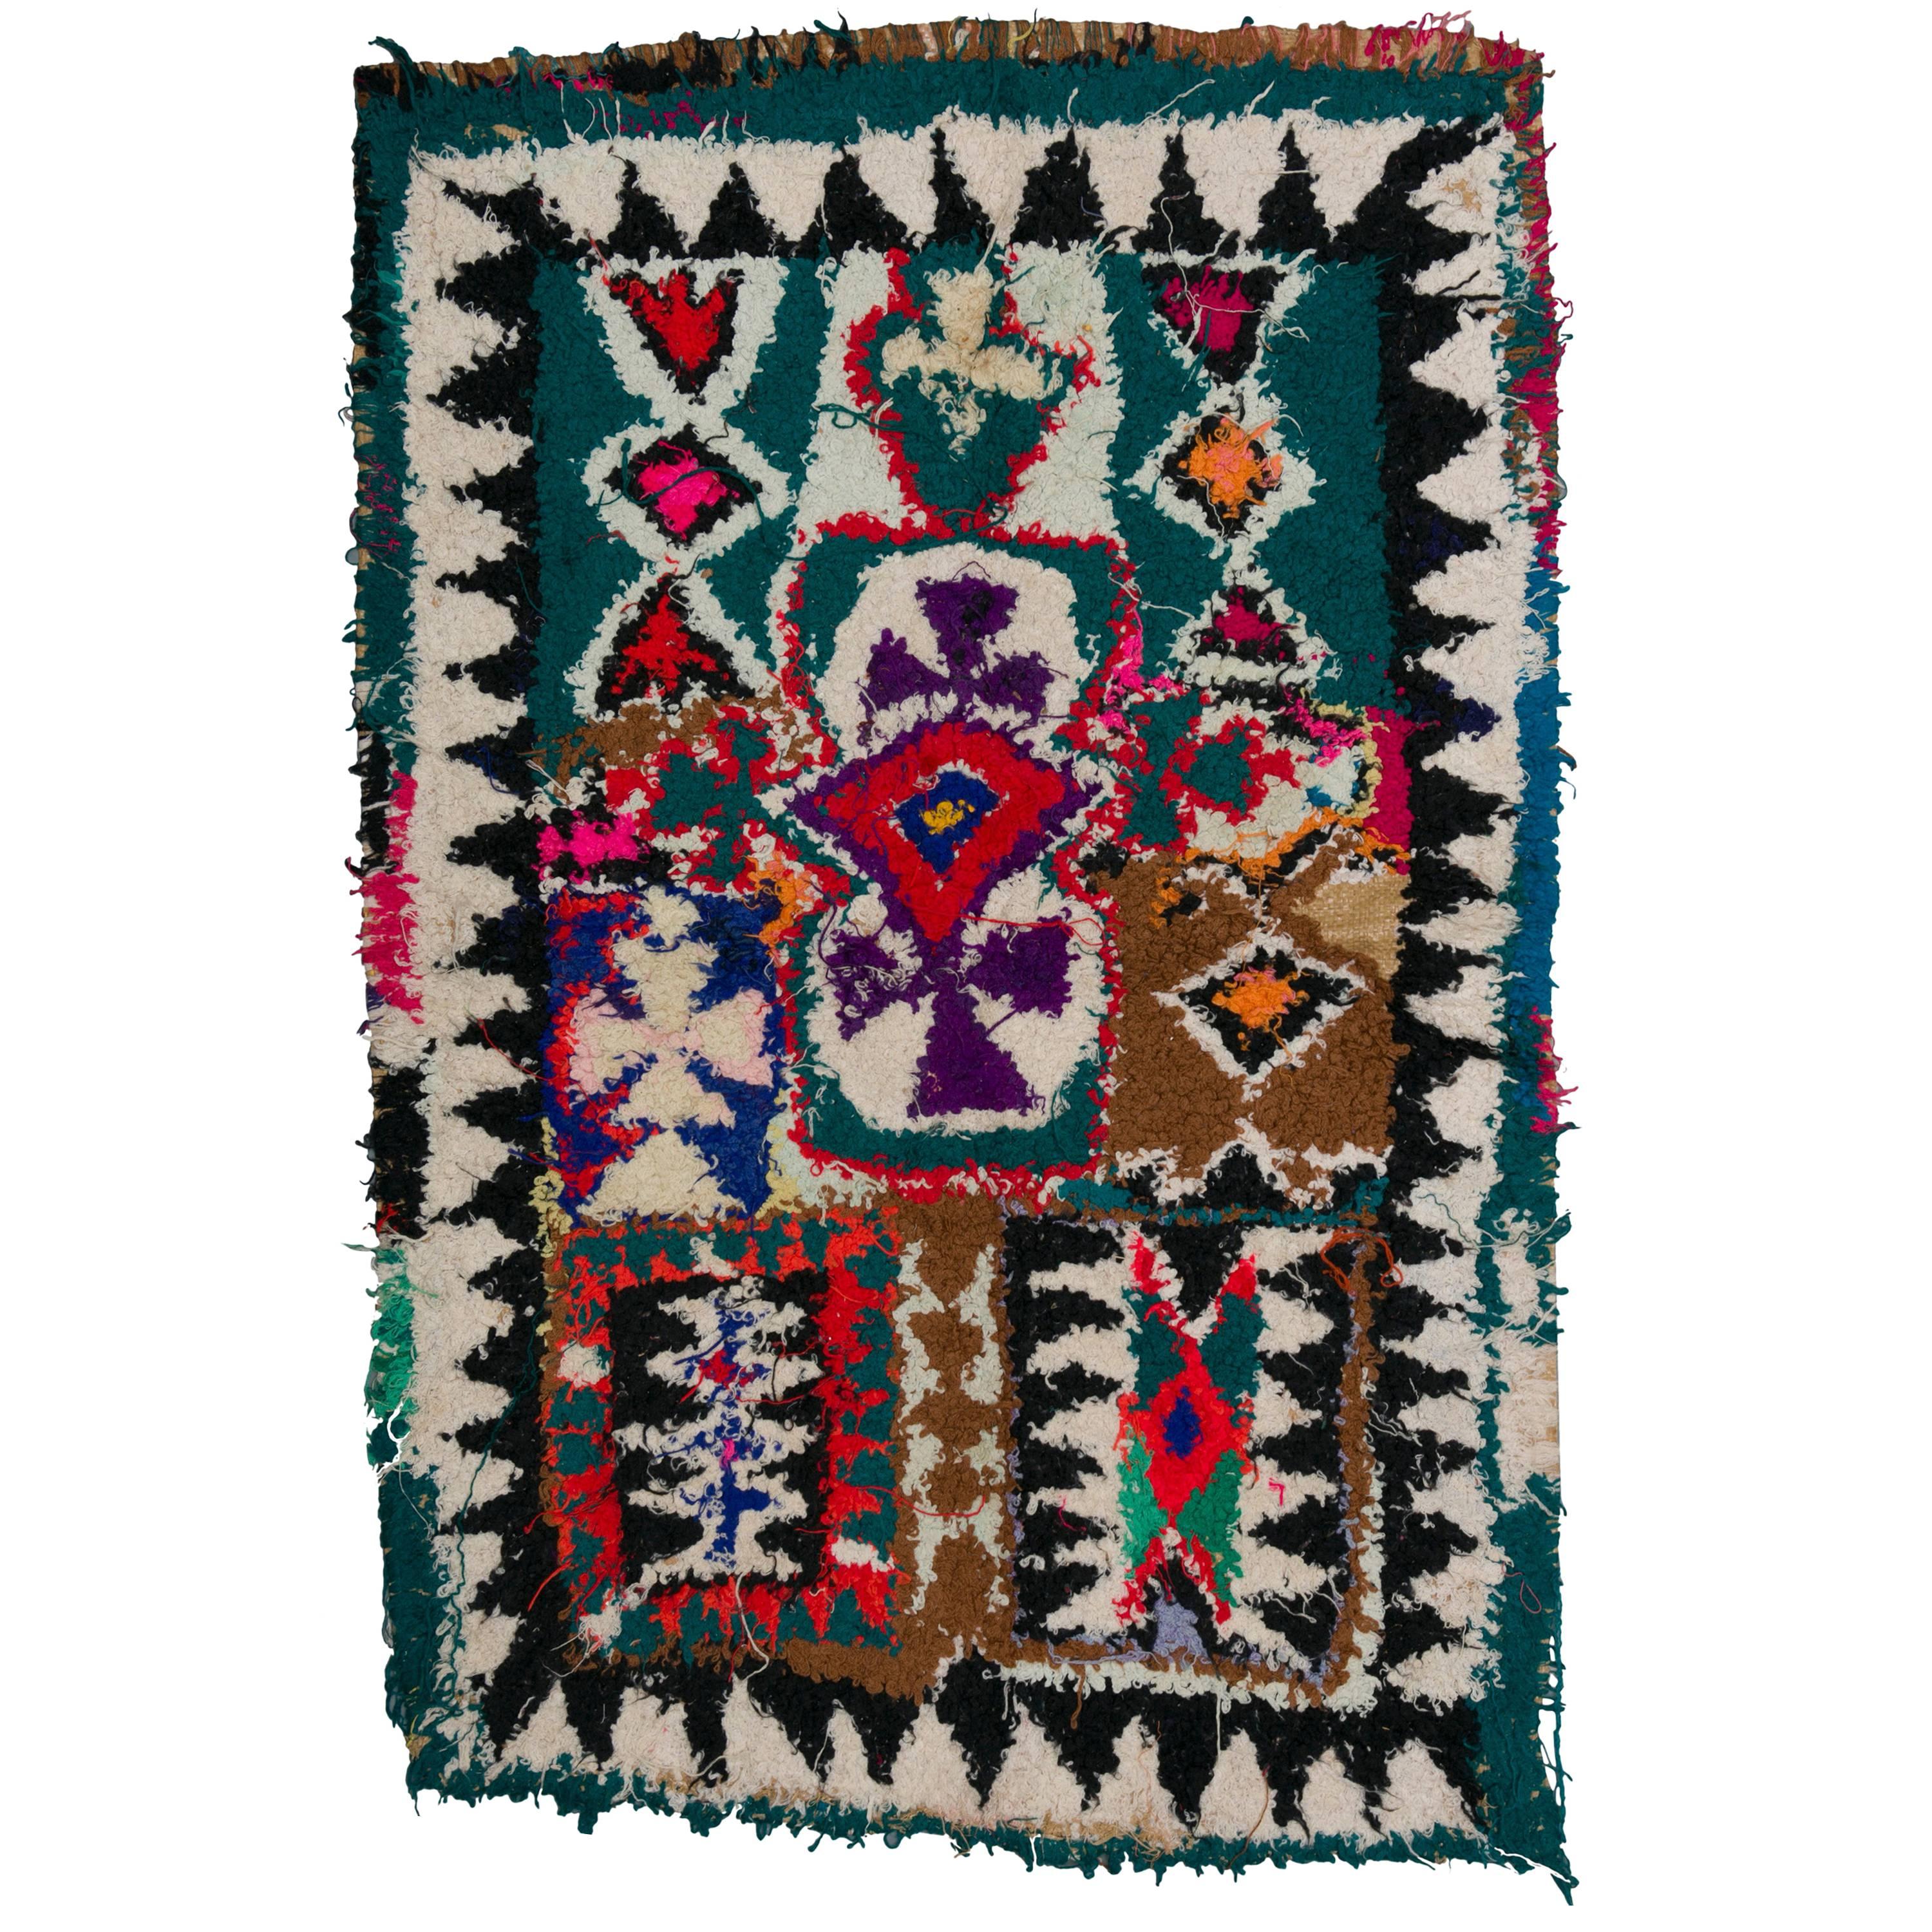 Rectangular Handmade Tapestry from Berber Women with Geometric Patterns For Sale